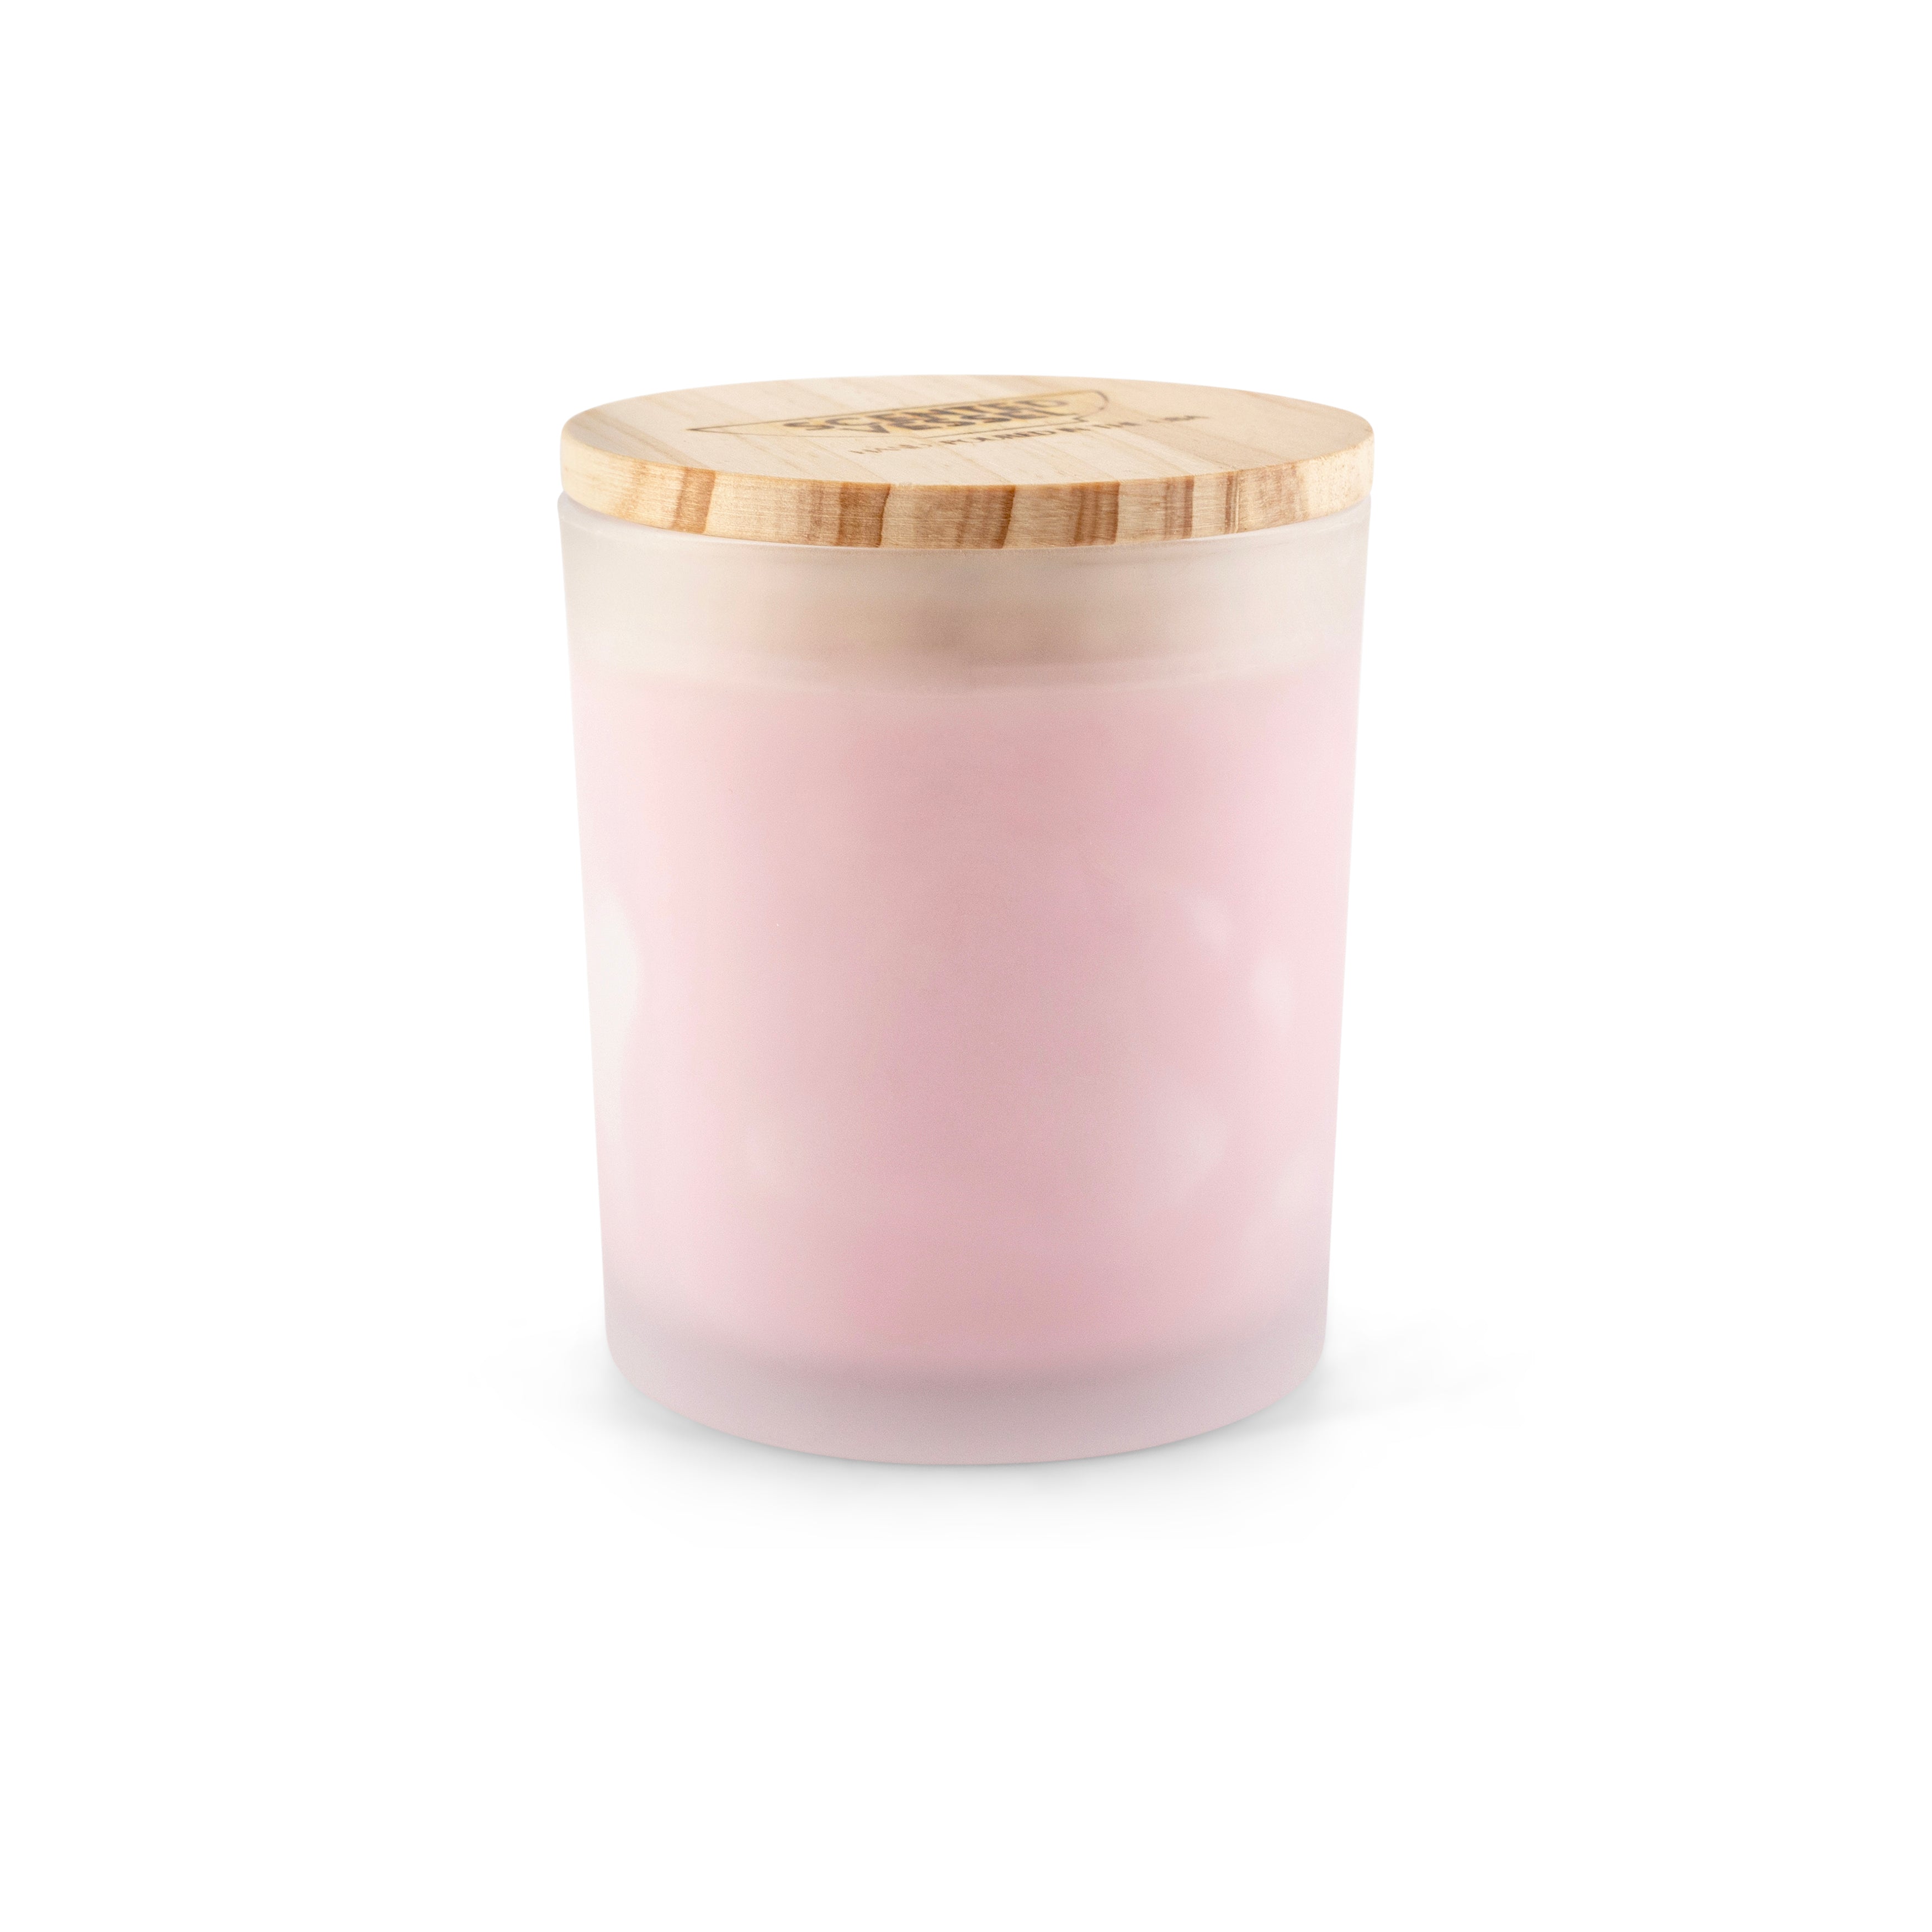 Peppermint 7.5oz Soy Wax Blend Candle by Scented Vessel